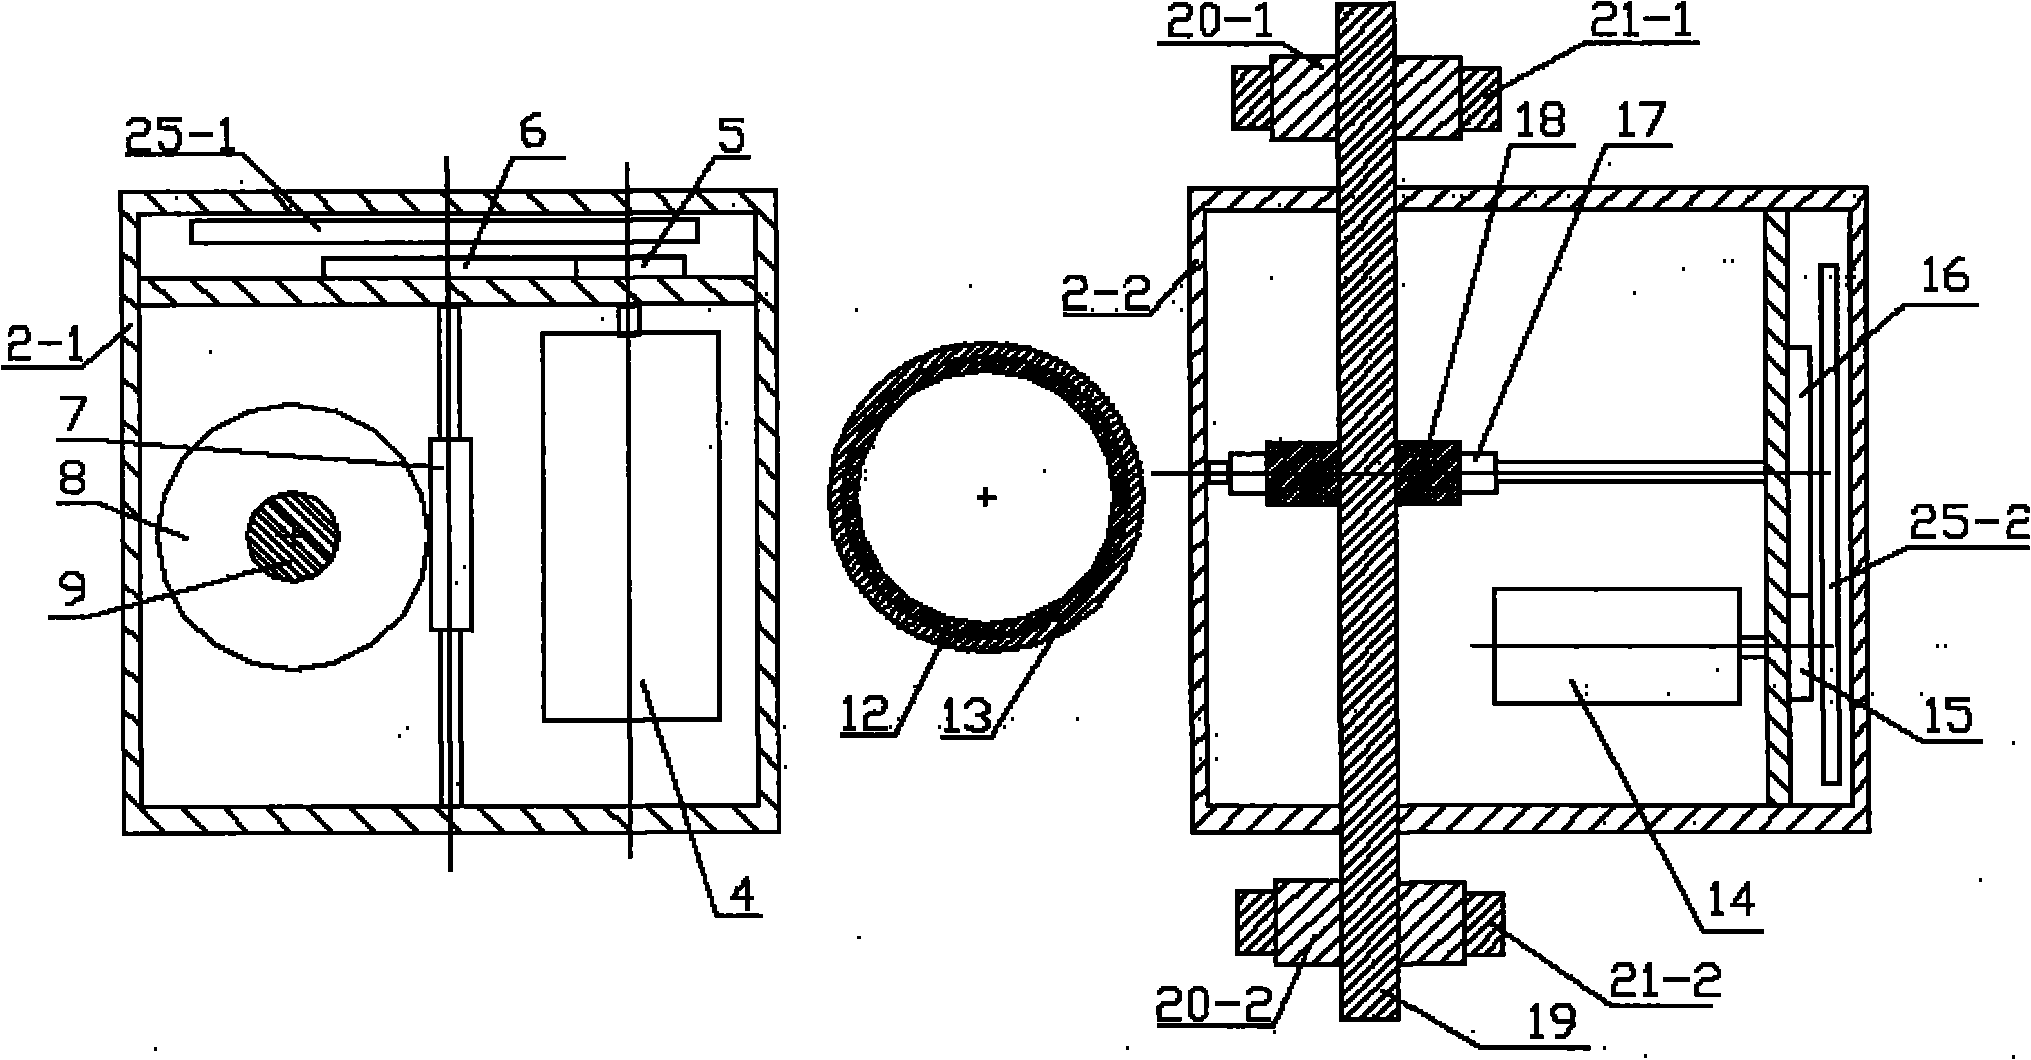 Large-power soft-driving pitch tracking three-dimensional solar light collecting device